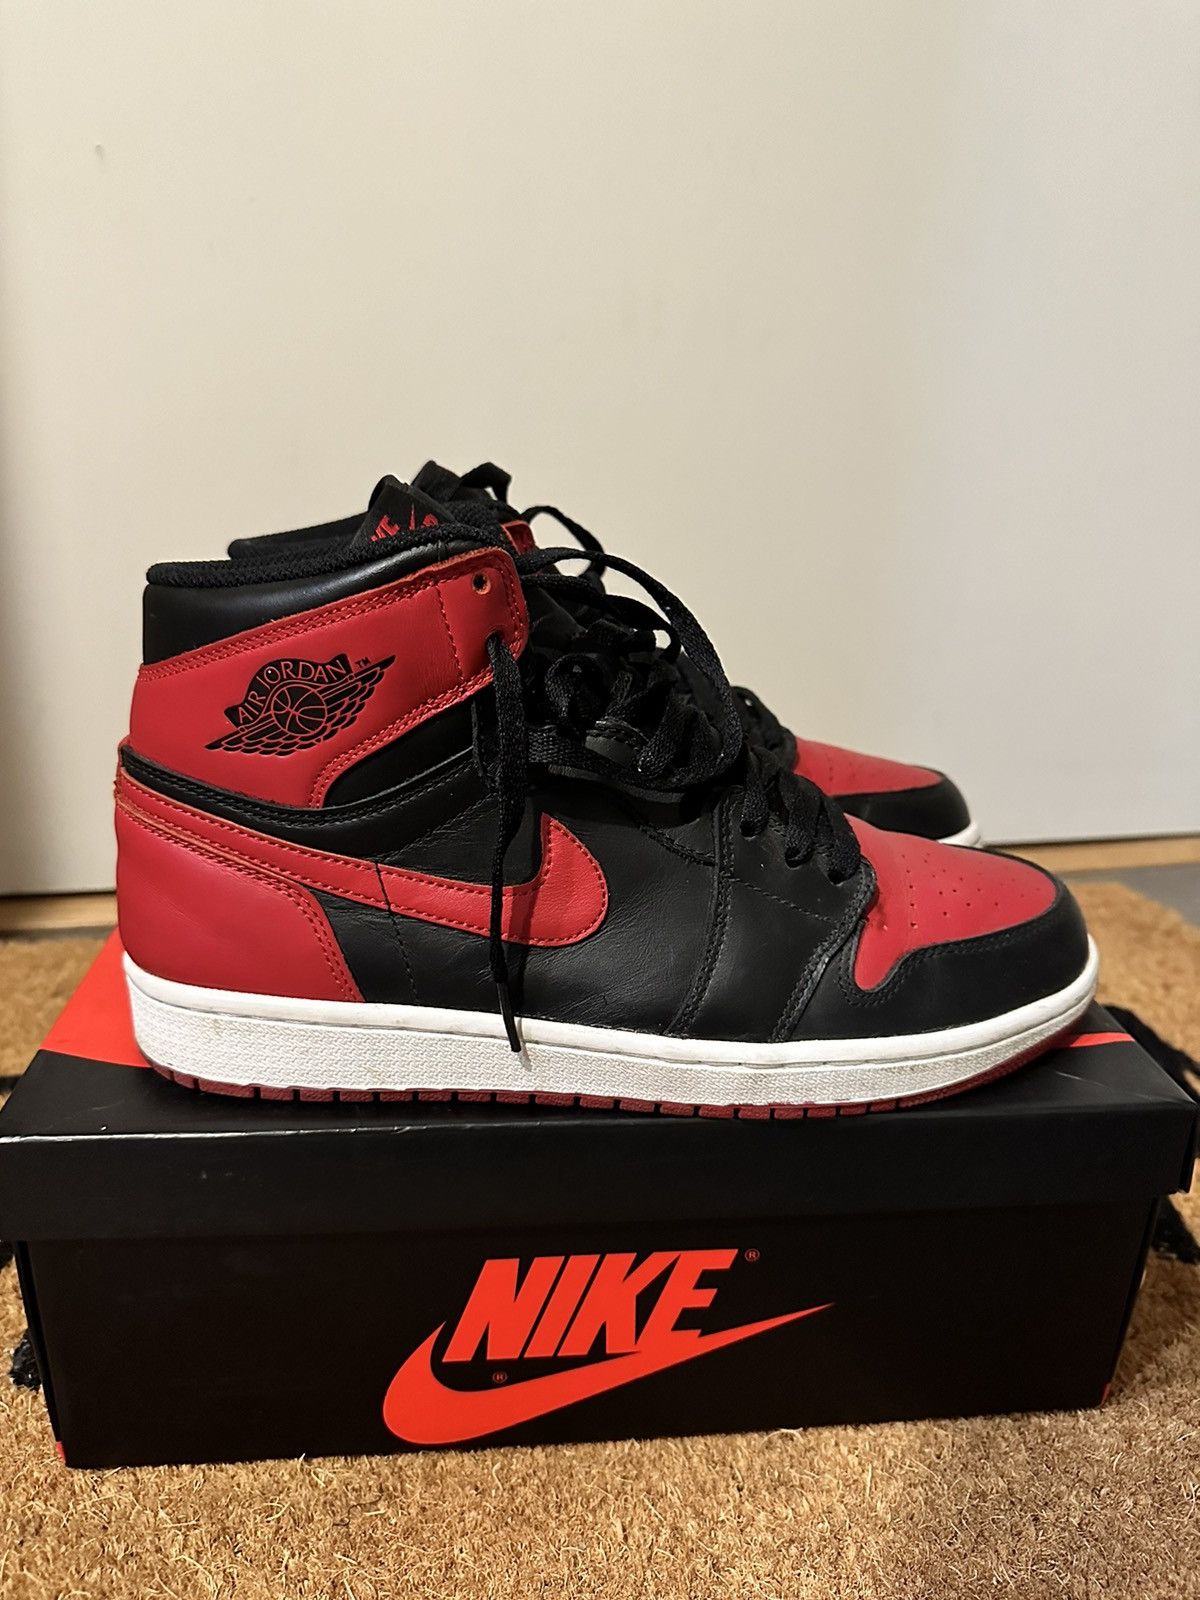 Pre-owned Jordan Brand 1 Retro Bred (2013) Shoes In Black Red